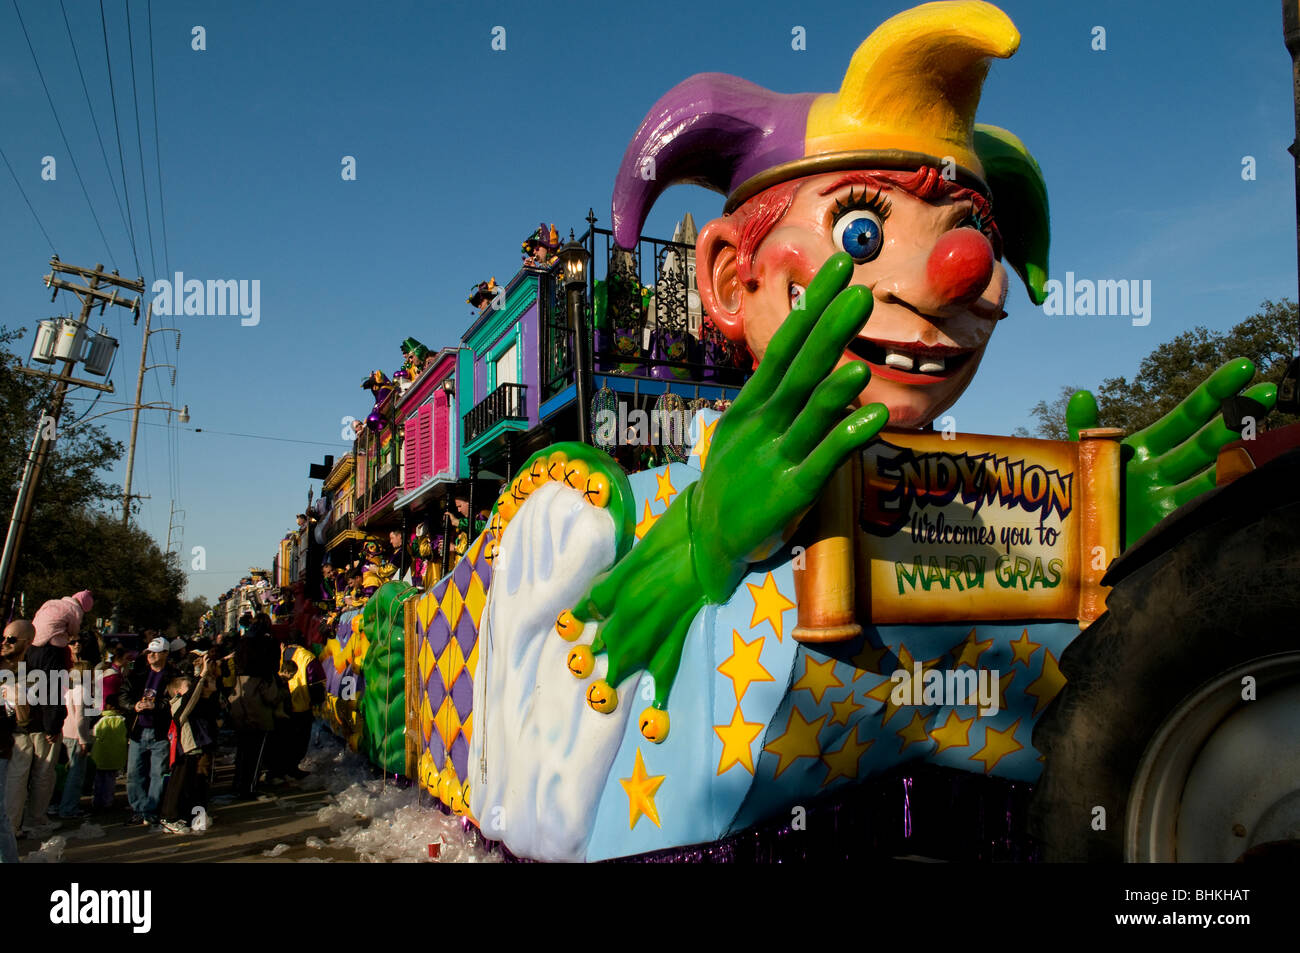 Staging area of Endymion with float, Mardi Gras 2010, New Orleans, Louisiana Stock Photo